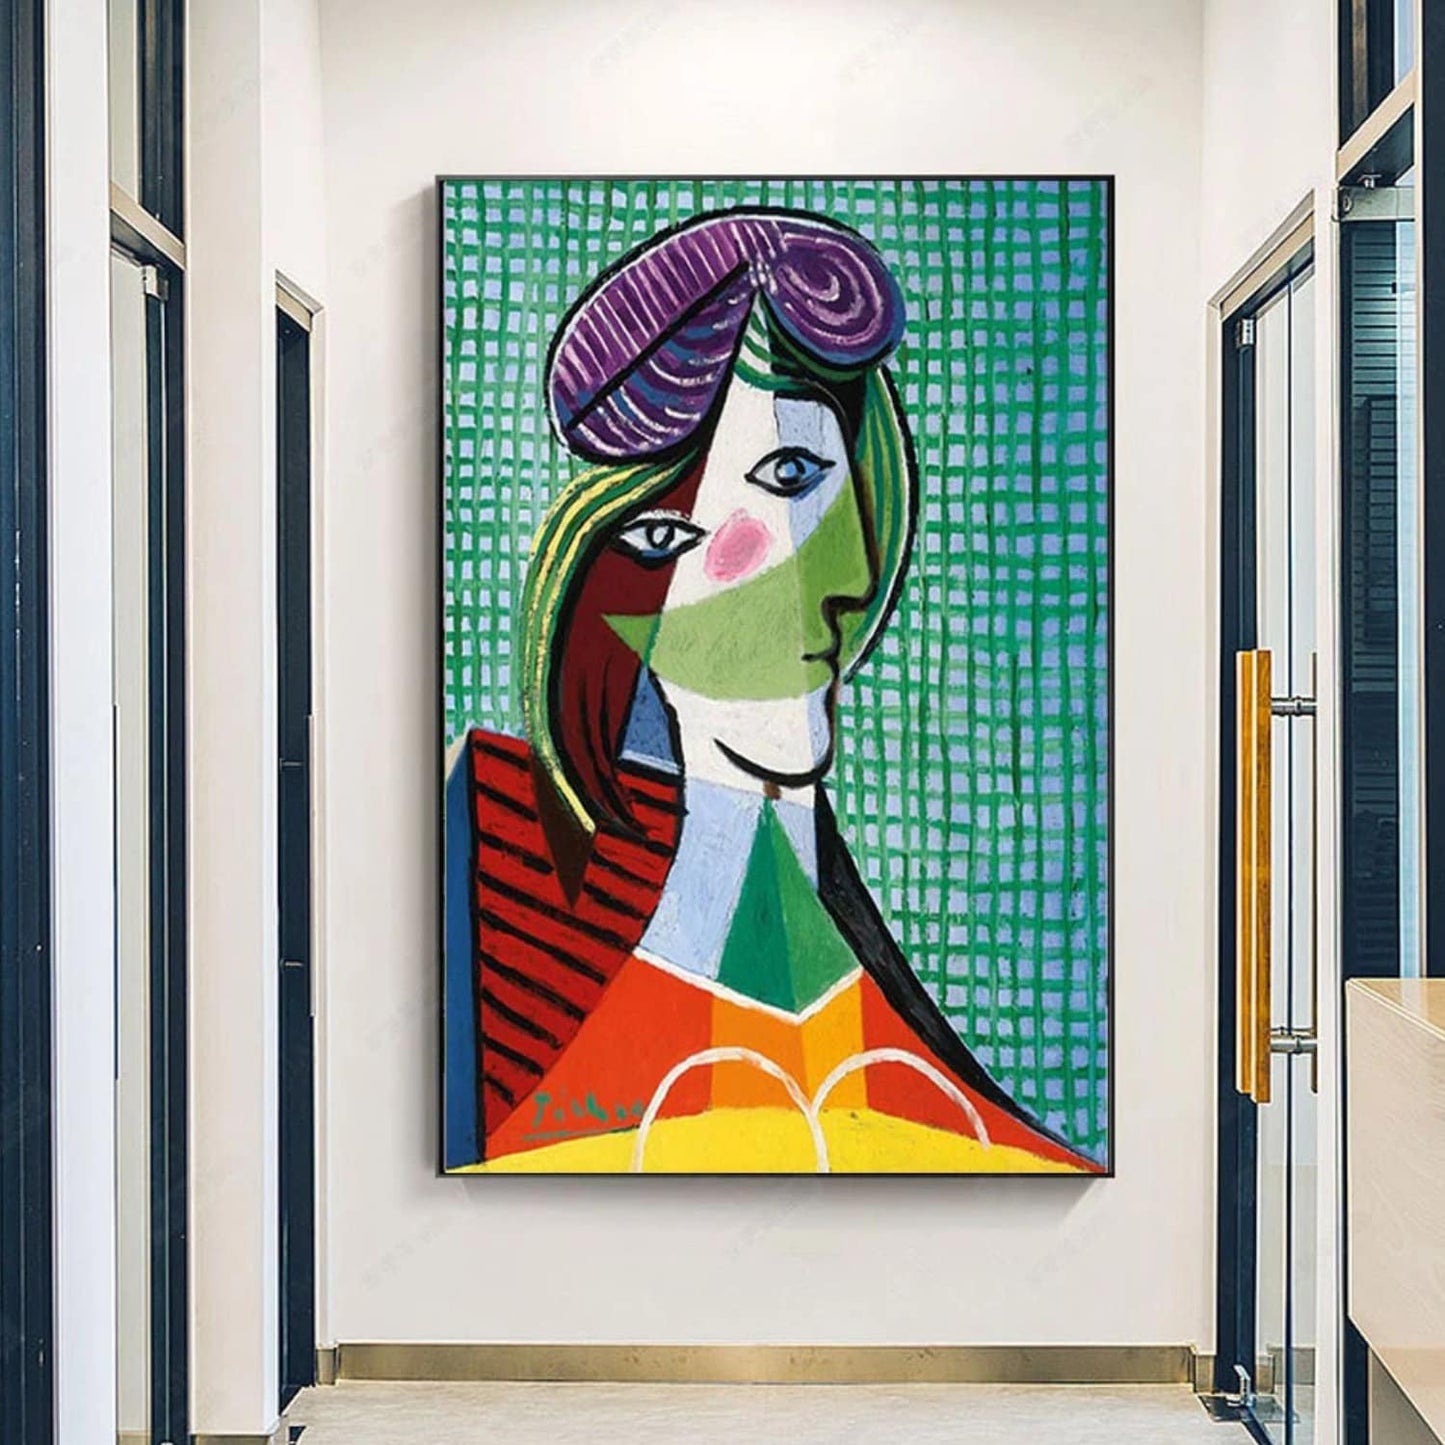 Colourful Women Picasso 100% Hand Painted Art